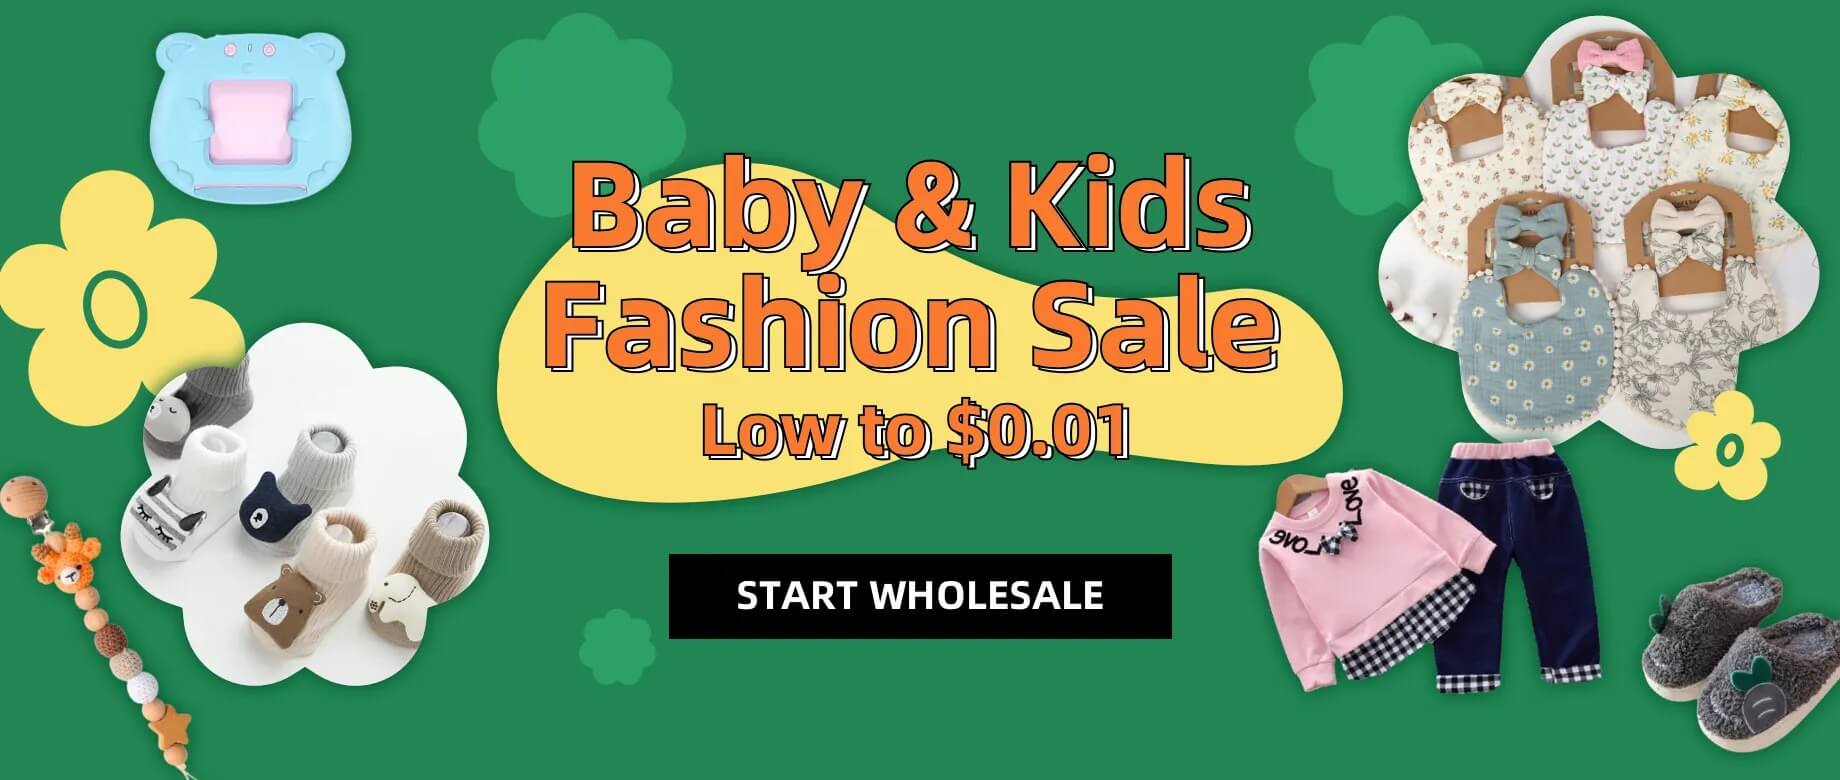 PROFITABLE BABY & KIDS CLOTHING BUSINESS WITH LOW INVESTMENT